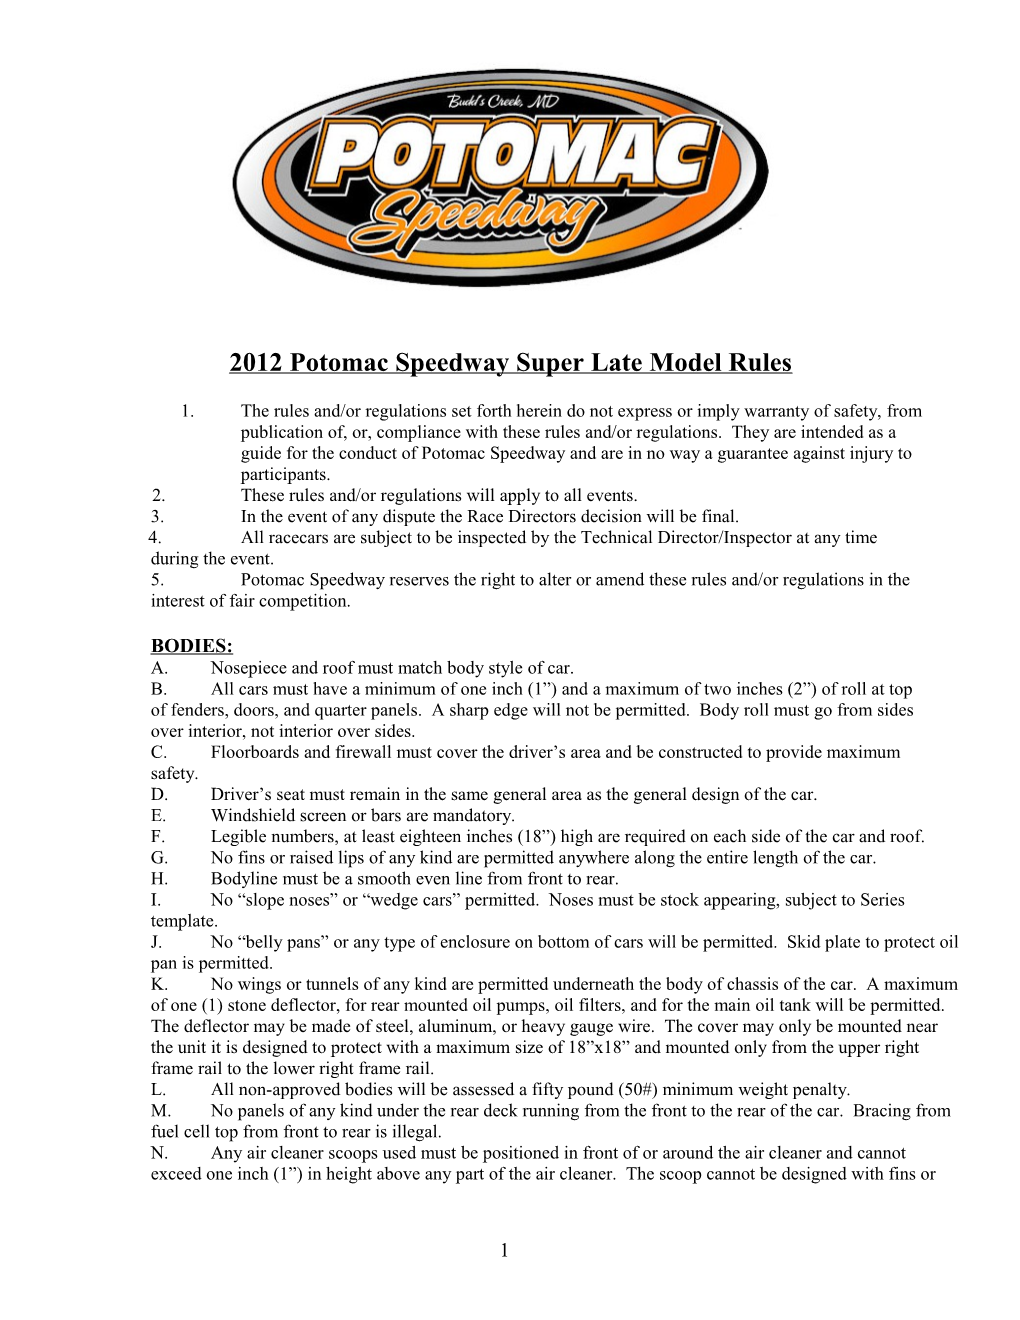 2012 Potomac Speedway Super Late Model Rules